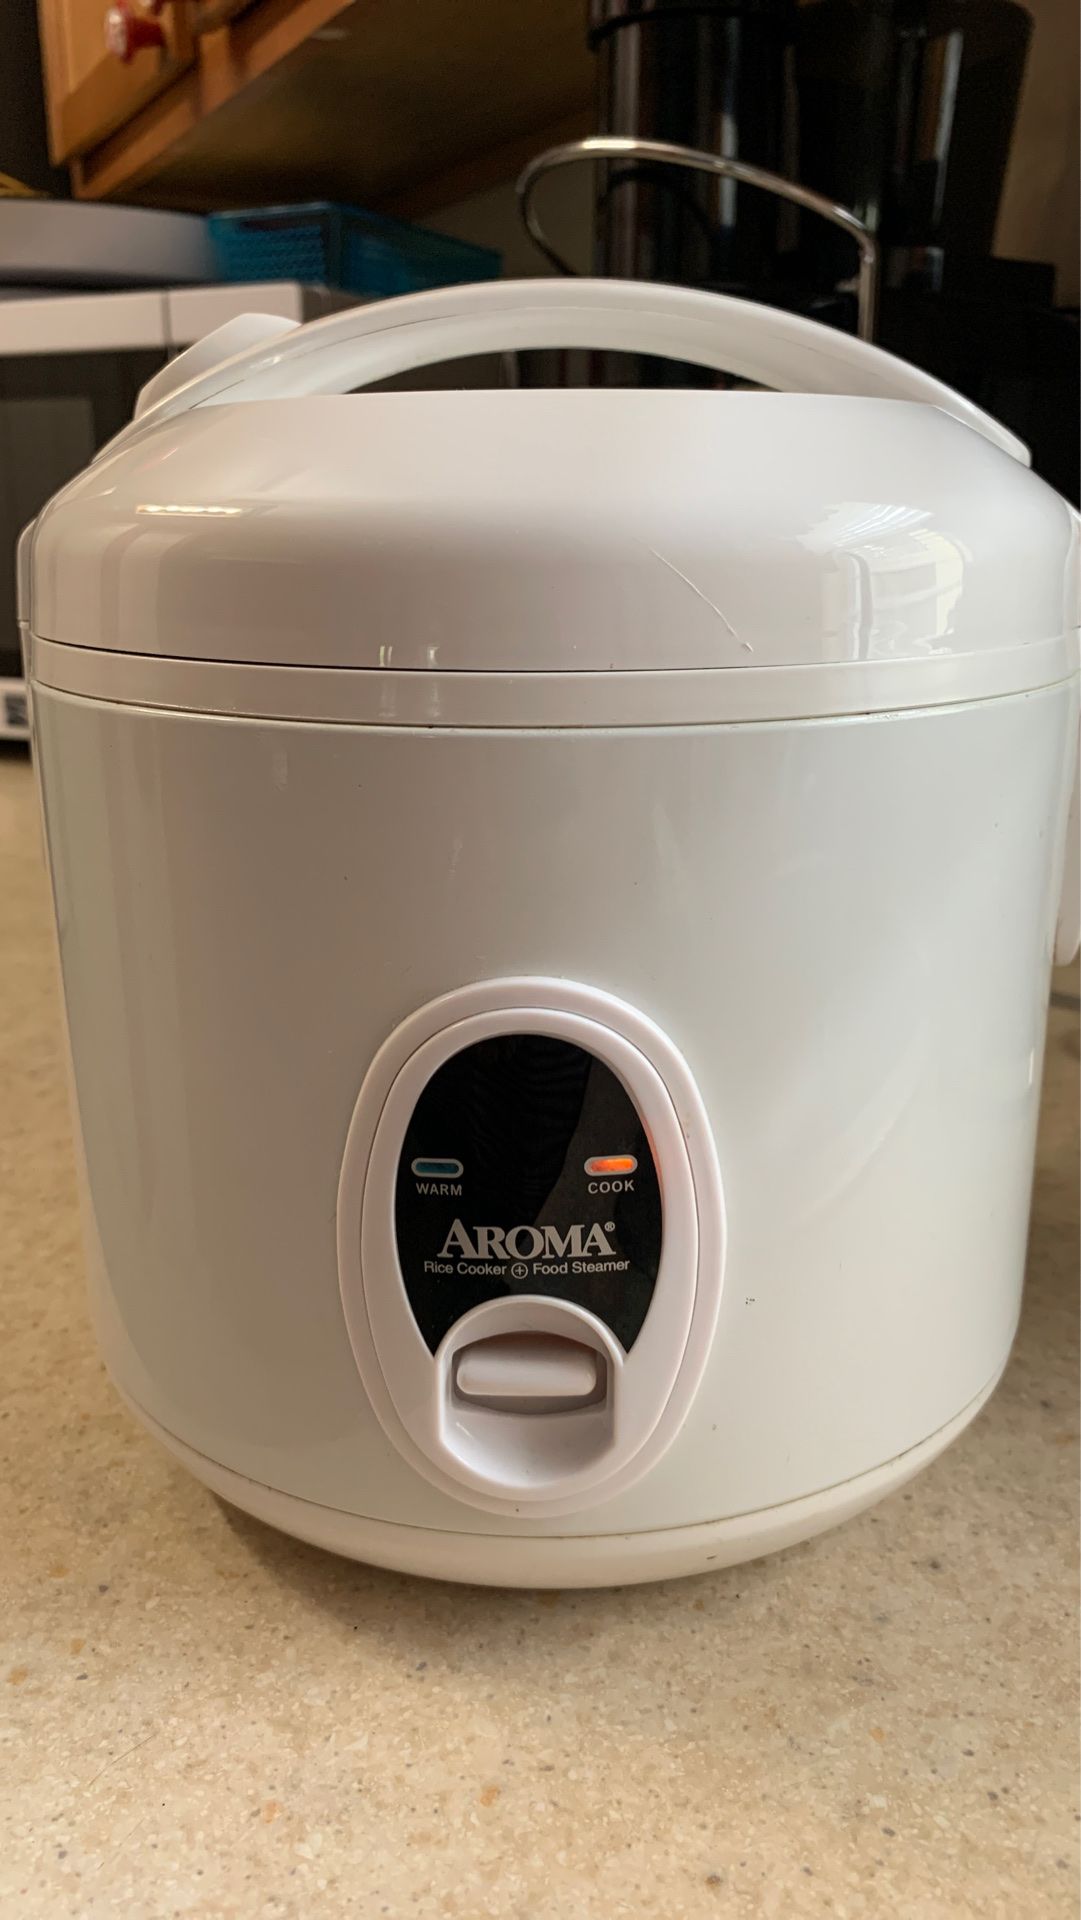 AROMA Rice Cooker 4 cups